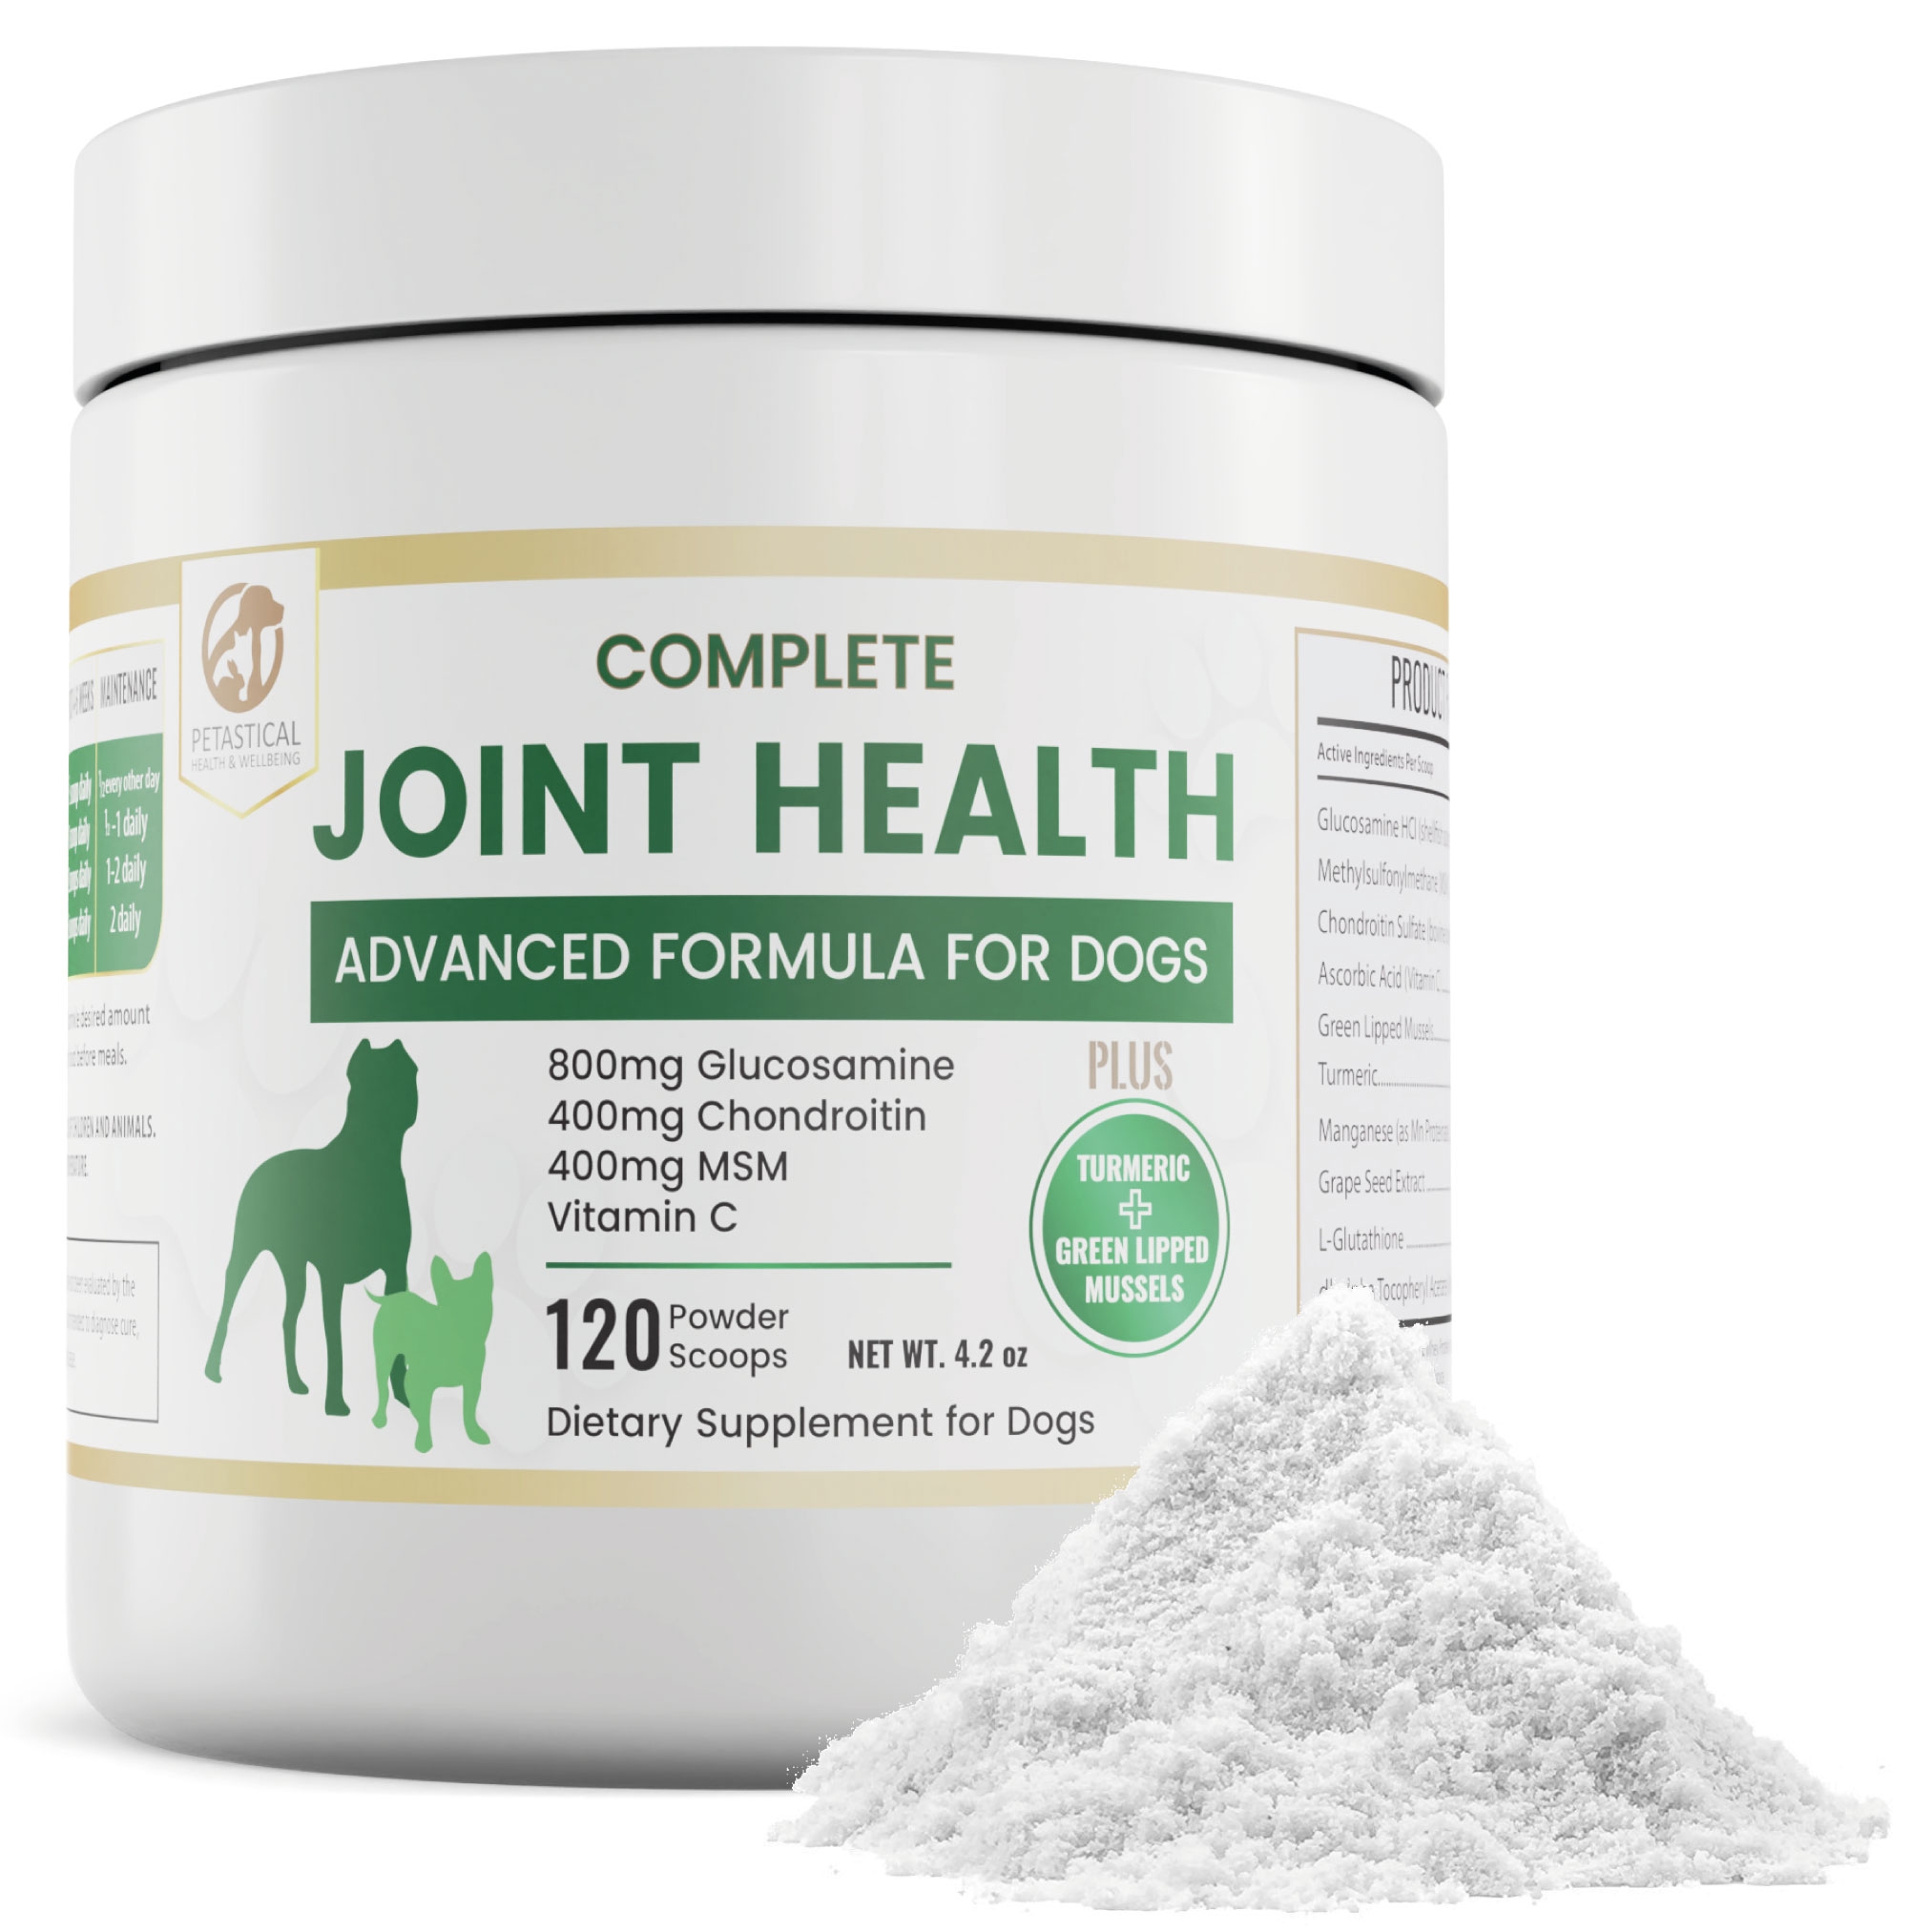 Petastical Hip and Joint Powder Supplement for Dogs (120 Scoops)